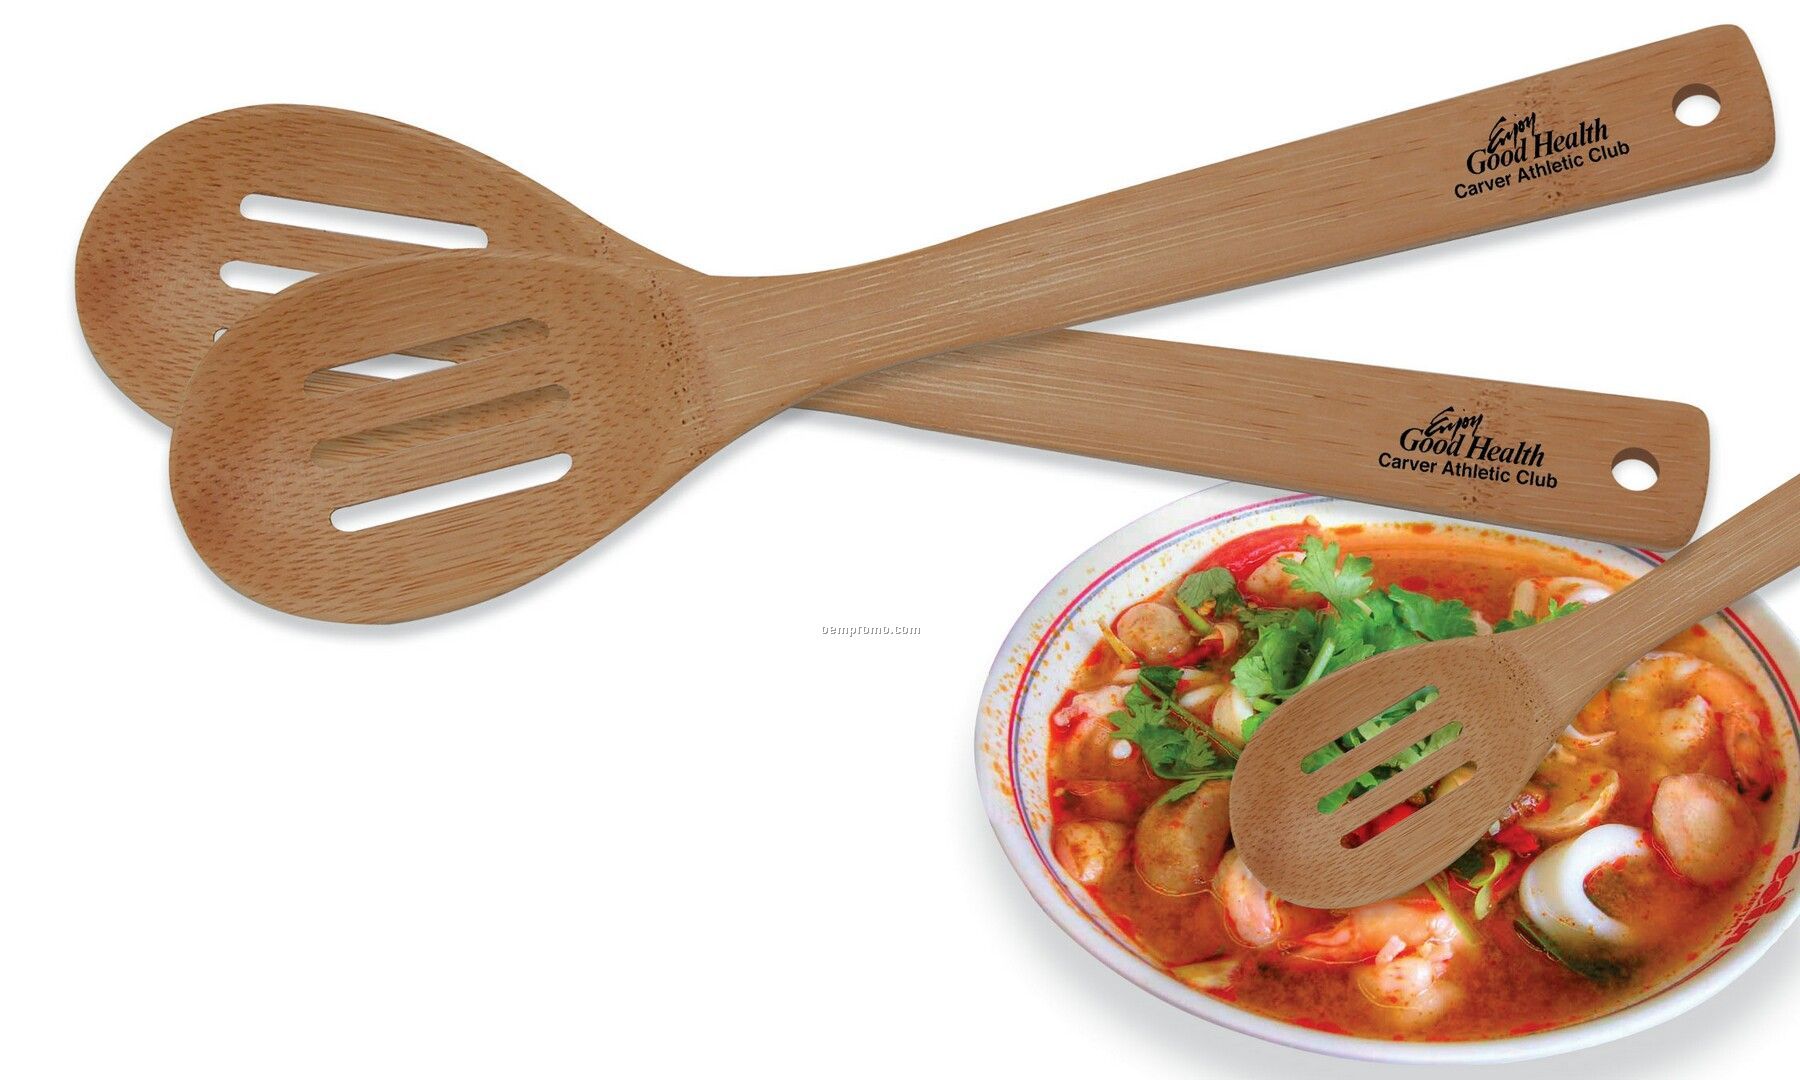 Bamboo Slotted Spoon